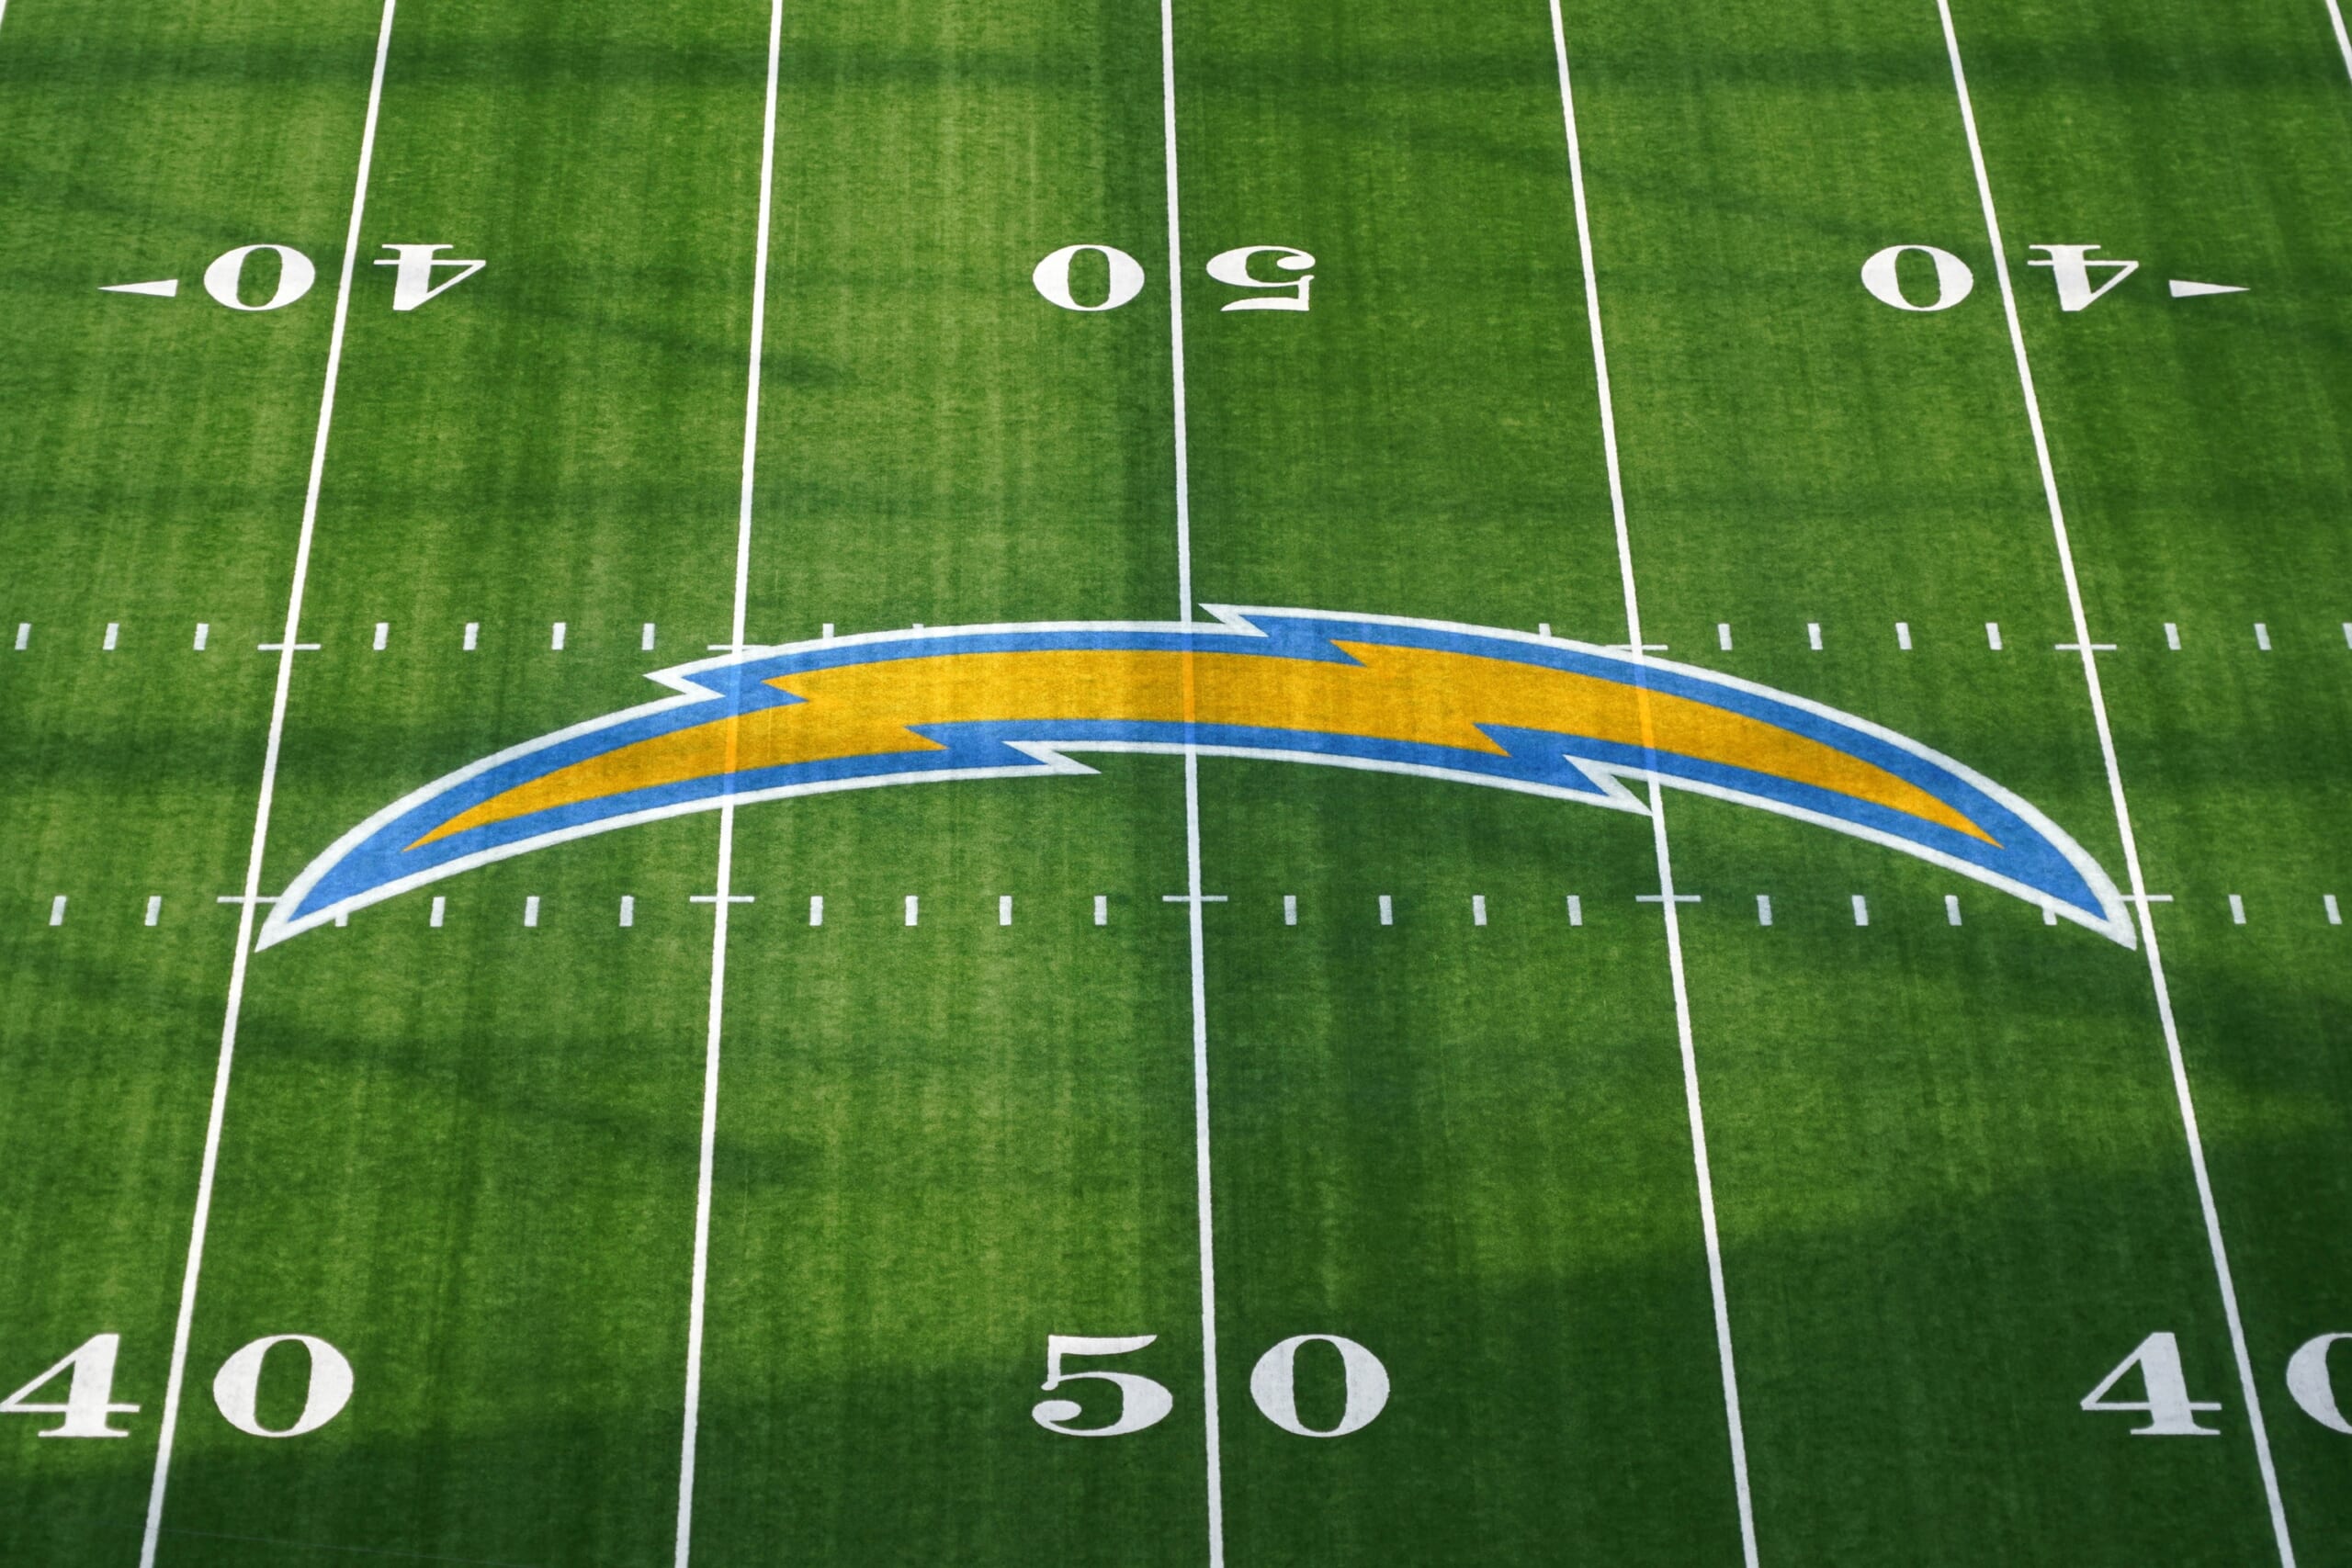 Los Angeles Chargers Schedule 2022 Los Angeles Chargers Schedule: 2022 Opponents